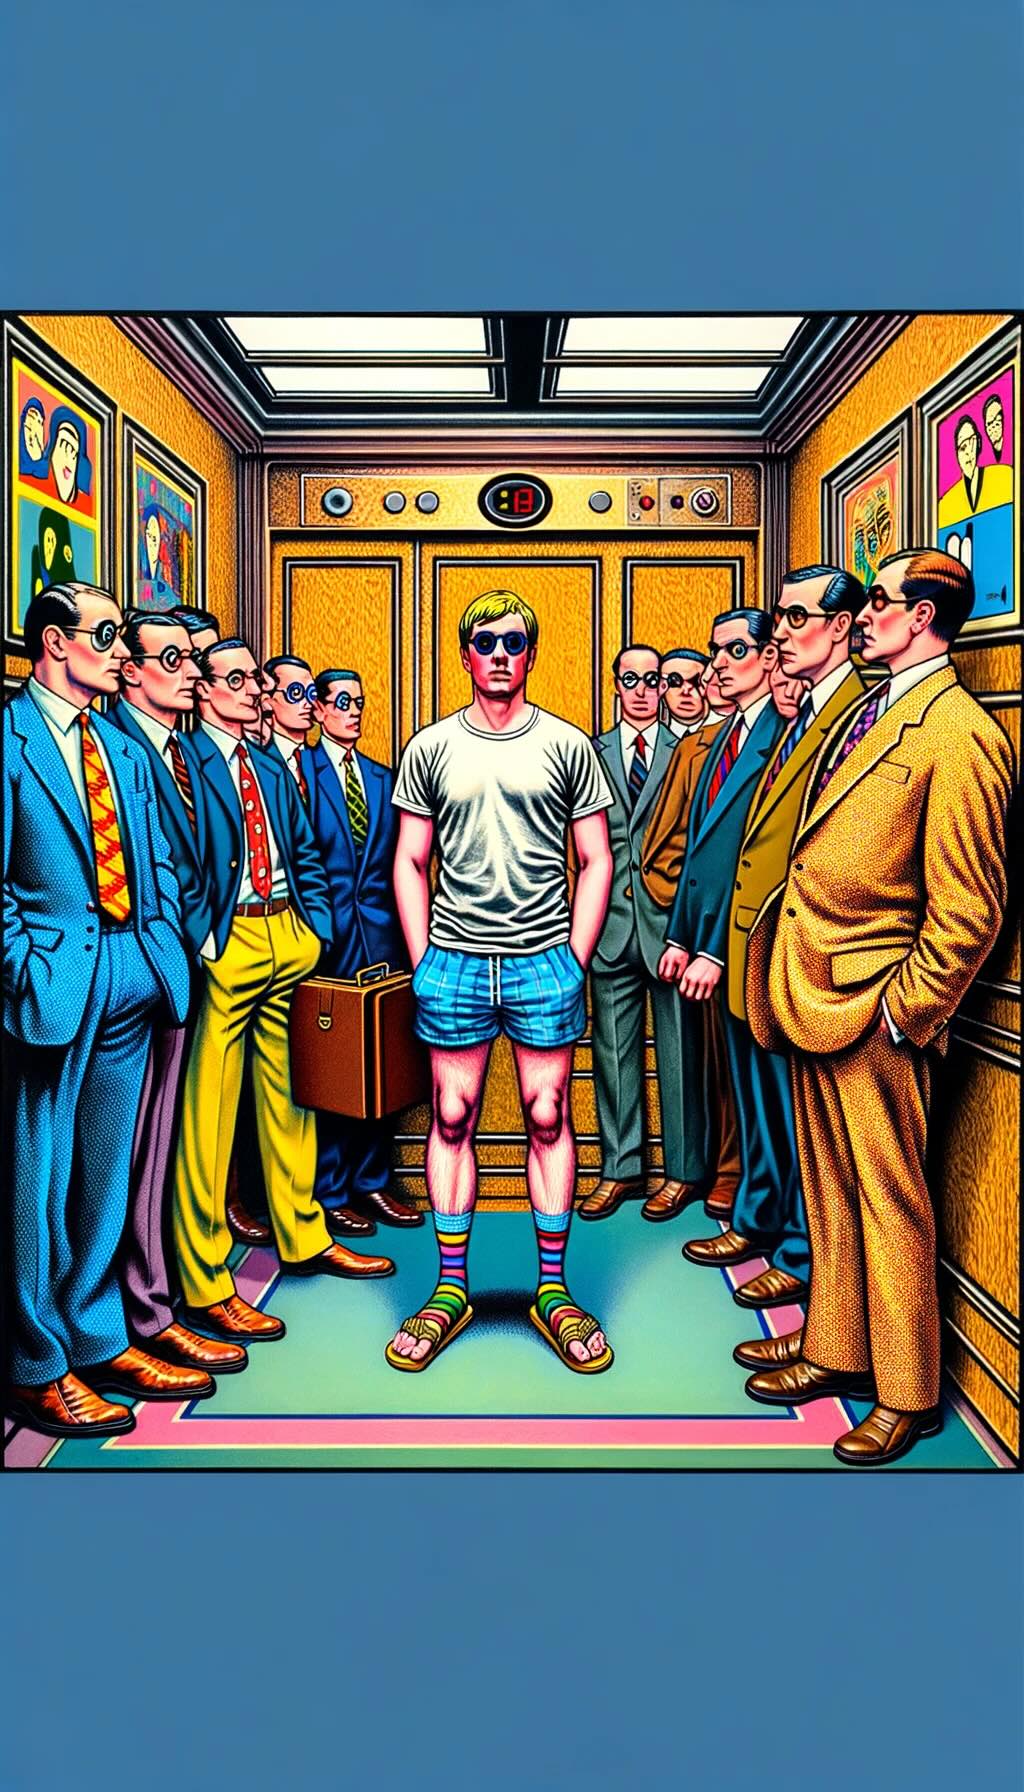 Awkwardness of being underdressed in an elevator filled with businessmen in suits. Our casually dressed protagonist, in t-shirt, shorts, and sandals, stands out amidst the exaggeratedly formal and oversized businessmen, evoking a sense of discomfort and absurdity. The elevator scene is bright and surreal, with bold patterns and colors emphasizing the clash between casual and corporate worlds. Each character, especially the underdressed one, is portrayed with exaggerated expressions, highlighting the humor in this mismatched situation. 